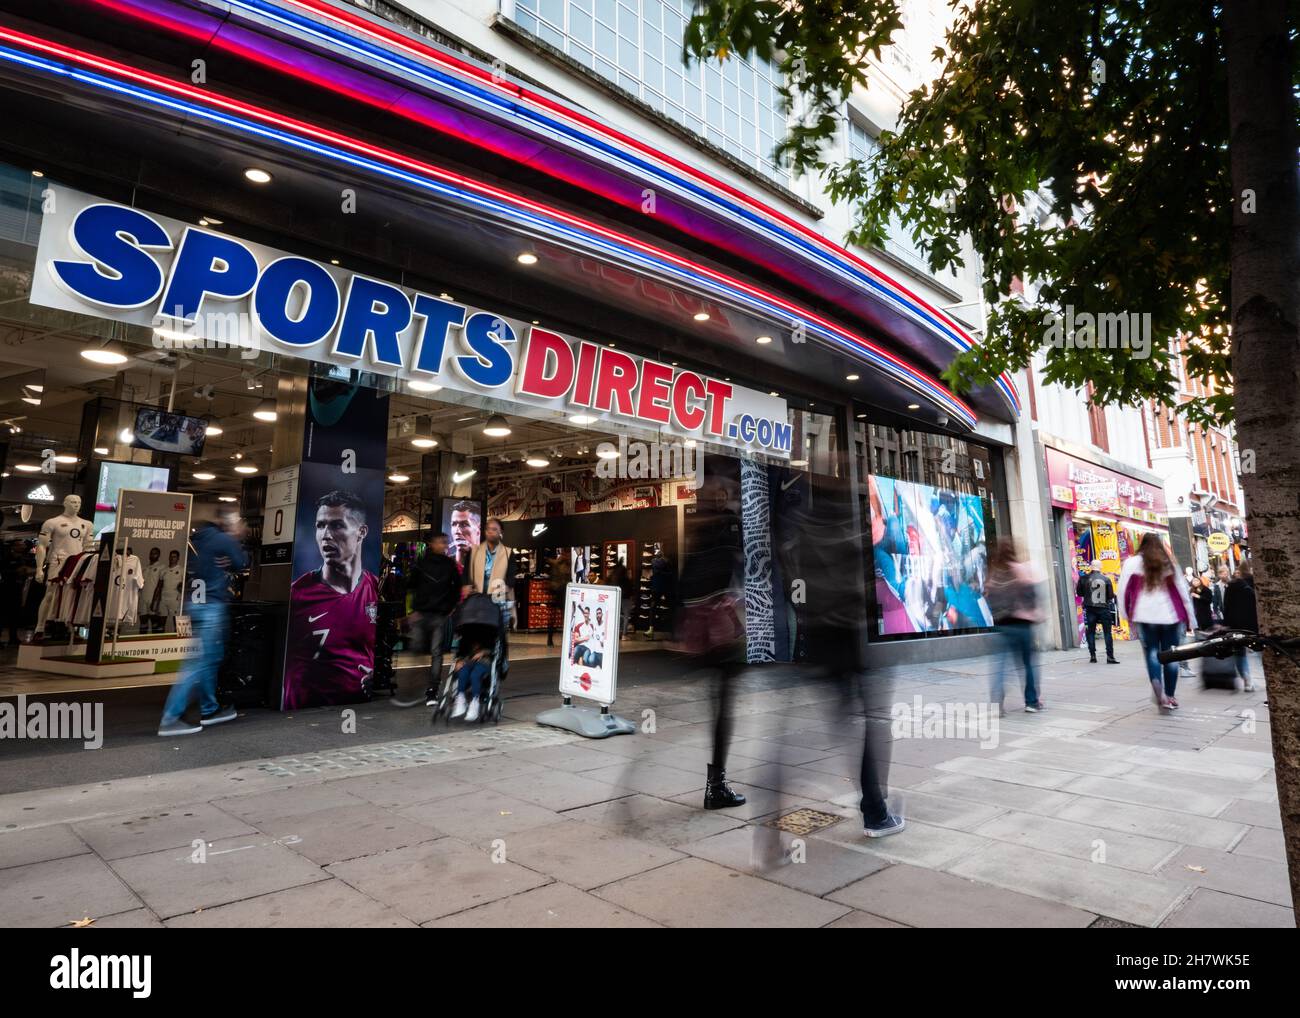 Sports Direct store, Oxford St., London. Shoppers passing the entrance to the flagship sports chain store on London's busy shopping district. Stock Photo